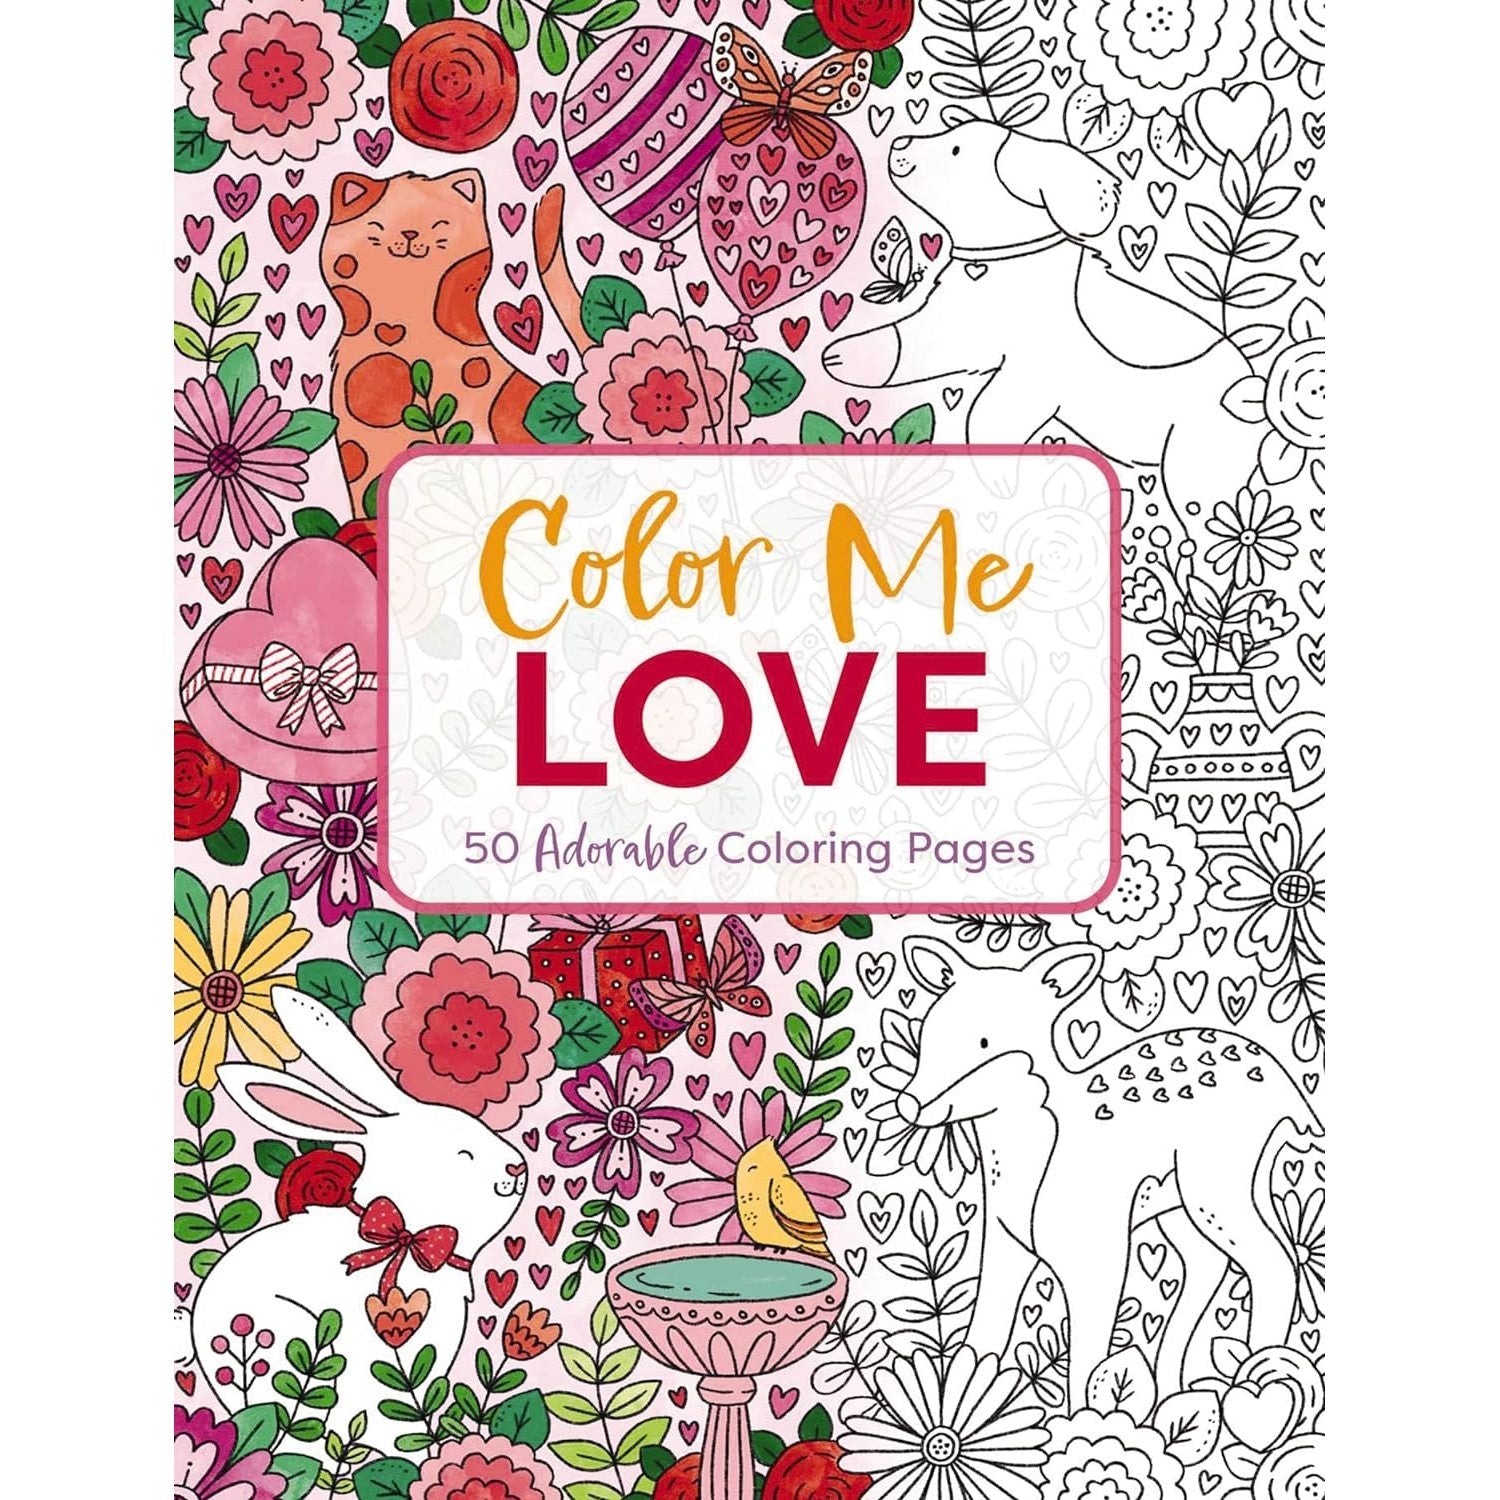 Ooly Color by Numbers Coloring Book - Wonderful World